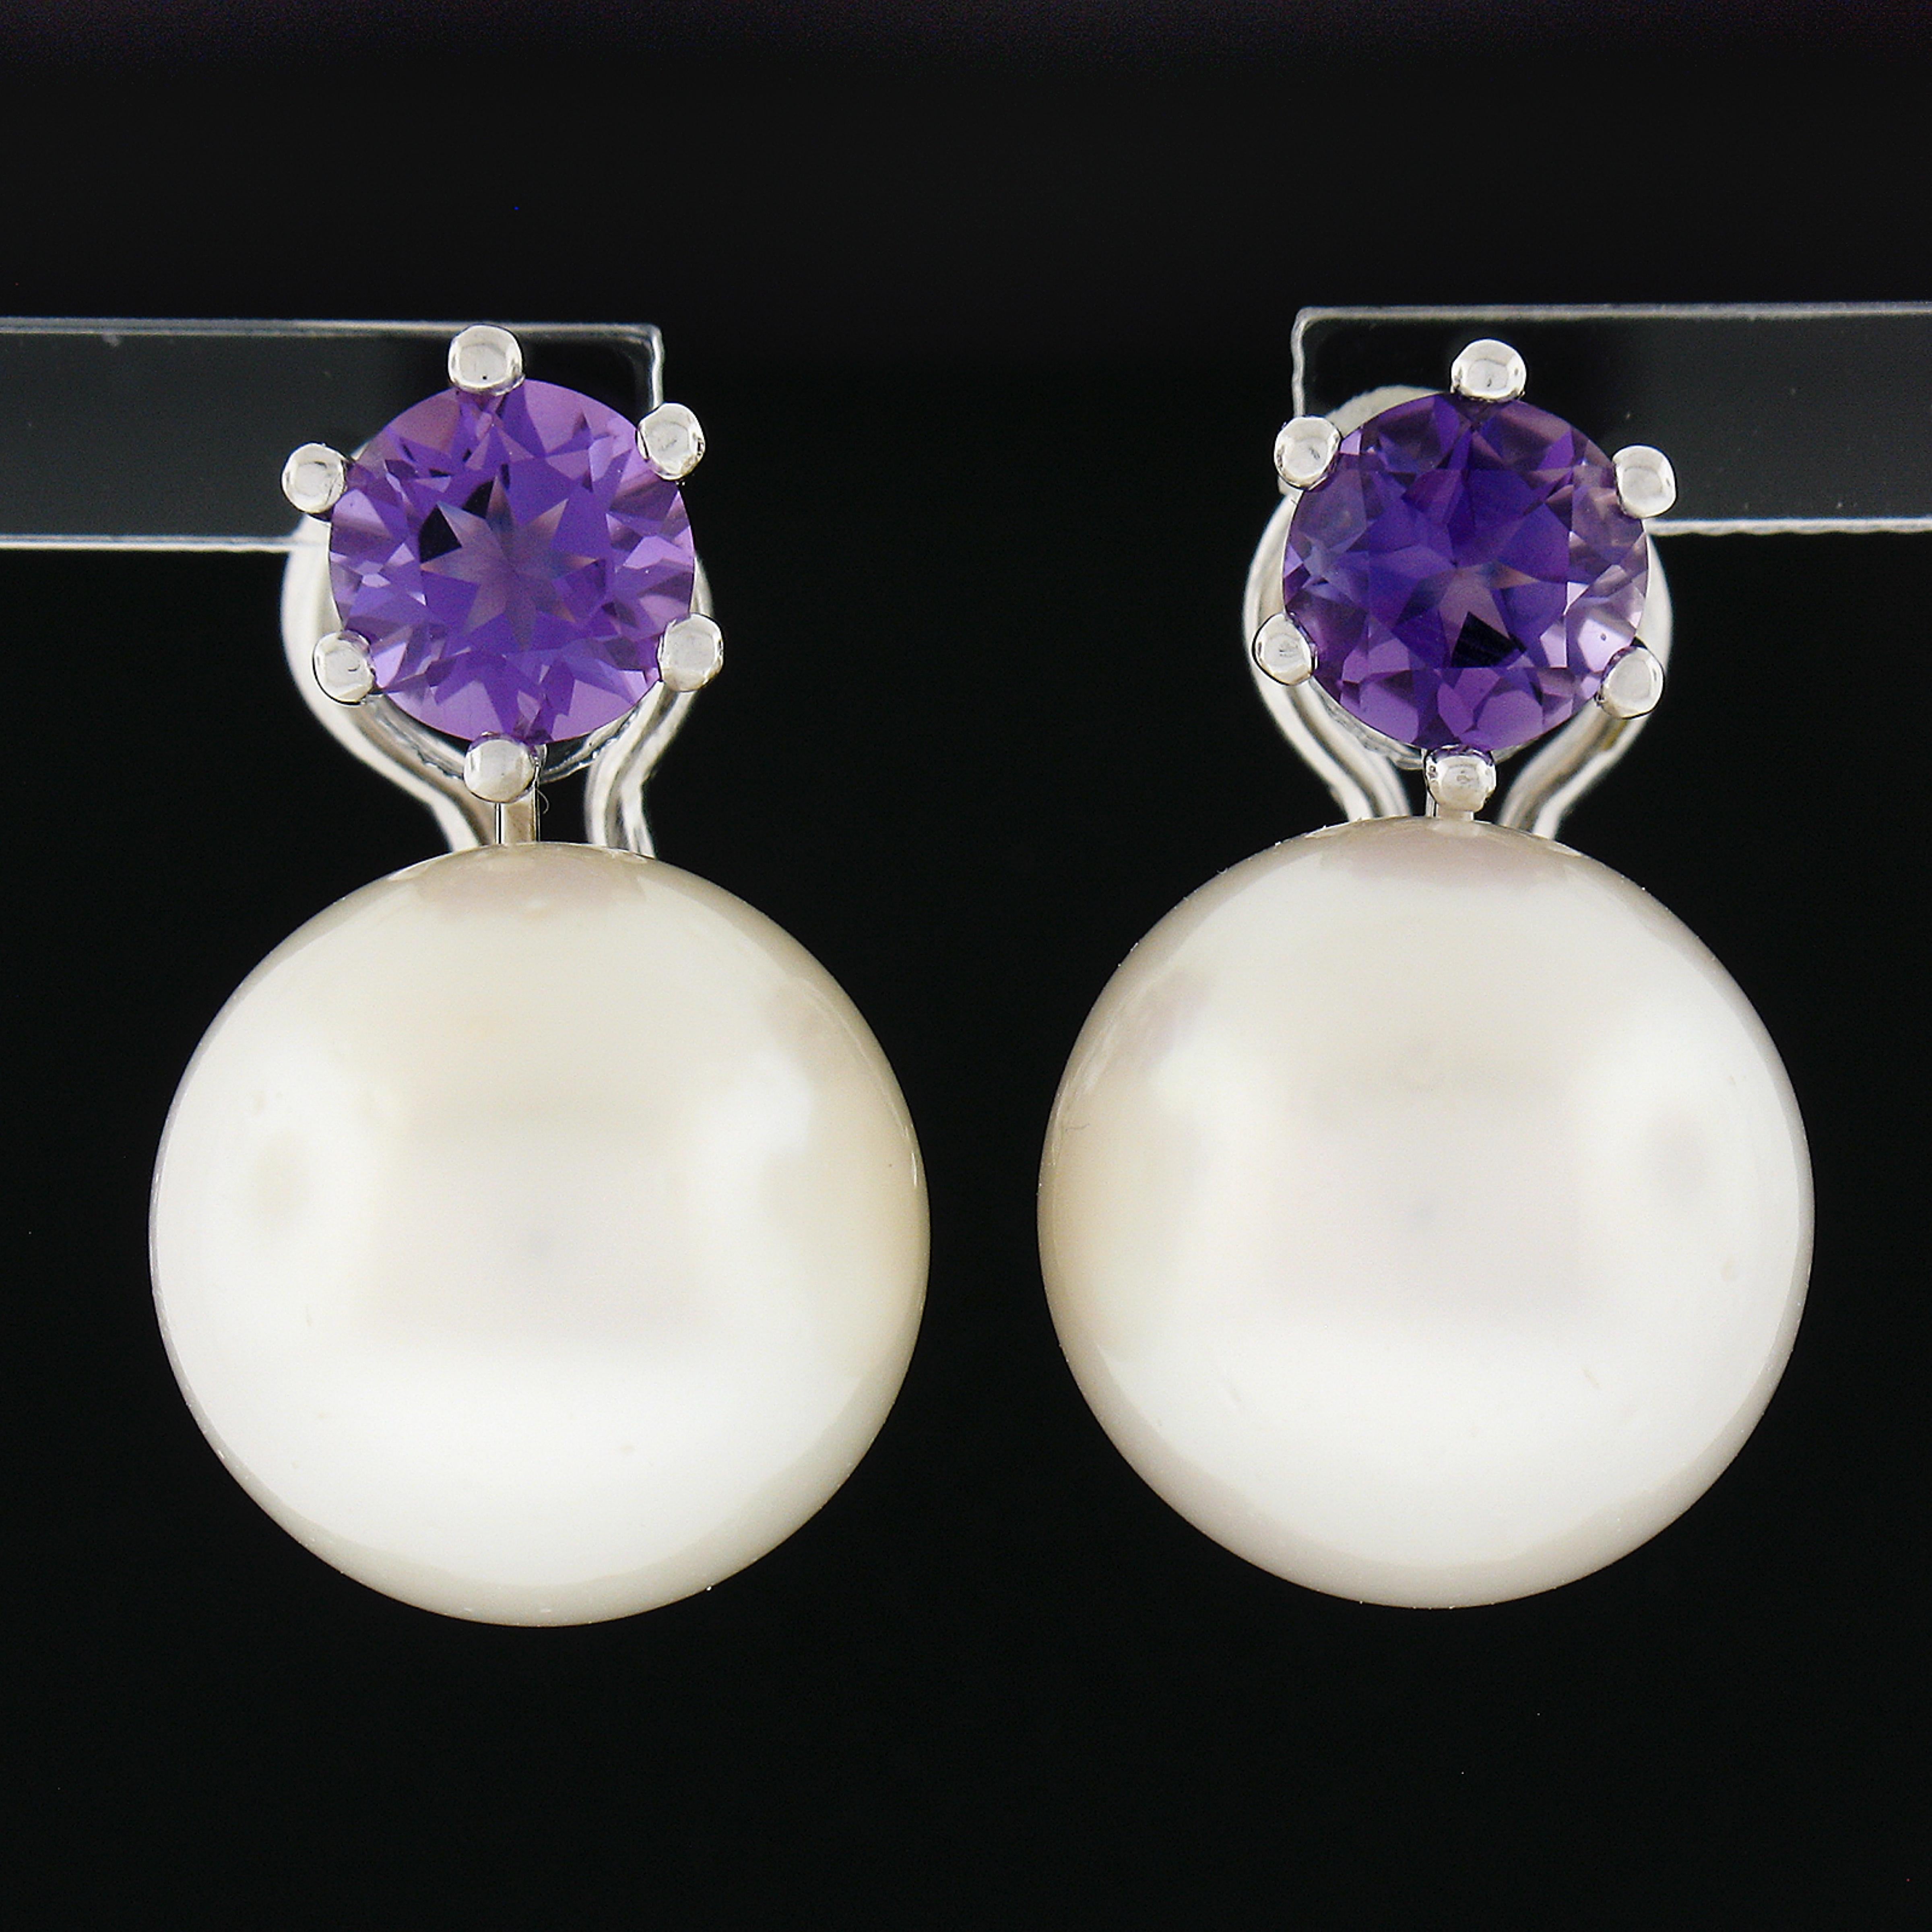 These lovely vintage drop earrings are crafted in solid 18k white gold and feature a simply elegant design with each carrying a very nice quality cultured pearl and natural amethyst stone. These fine pearls display an attractive large size on the